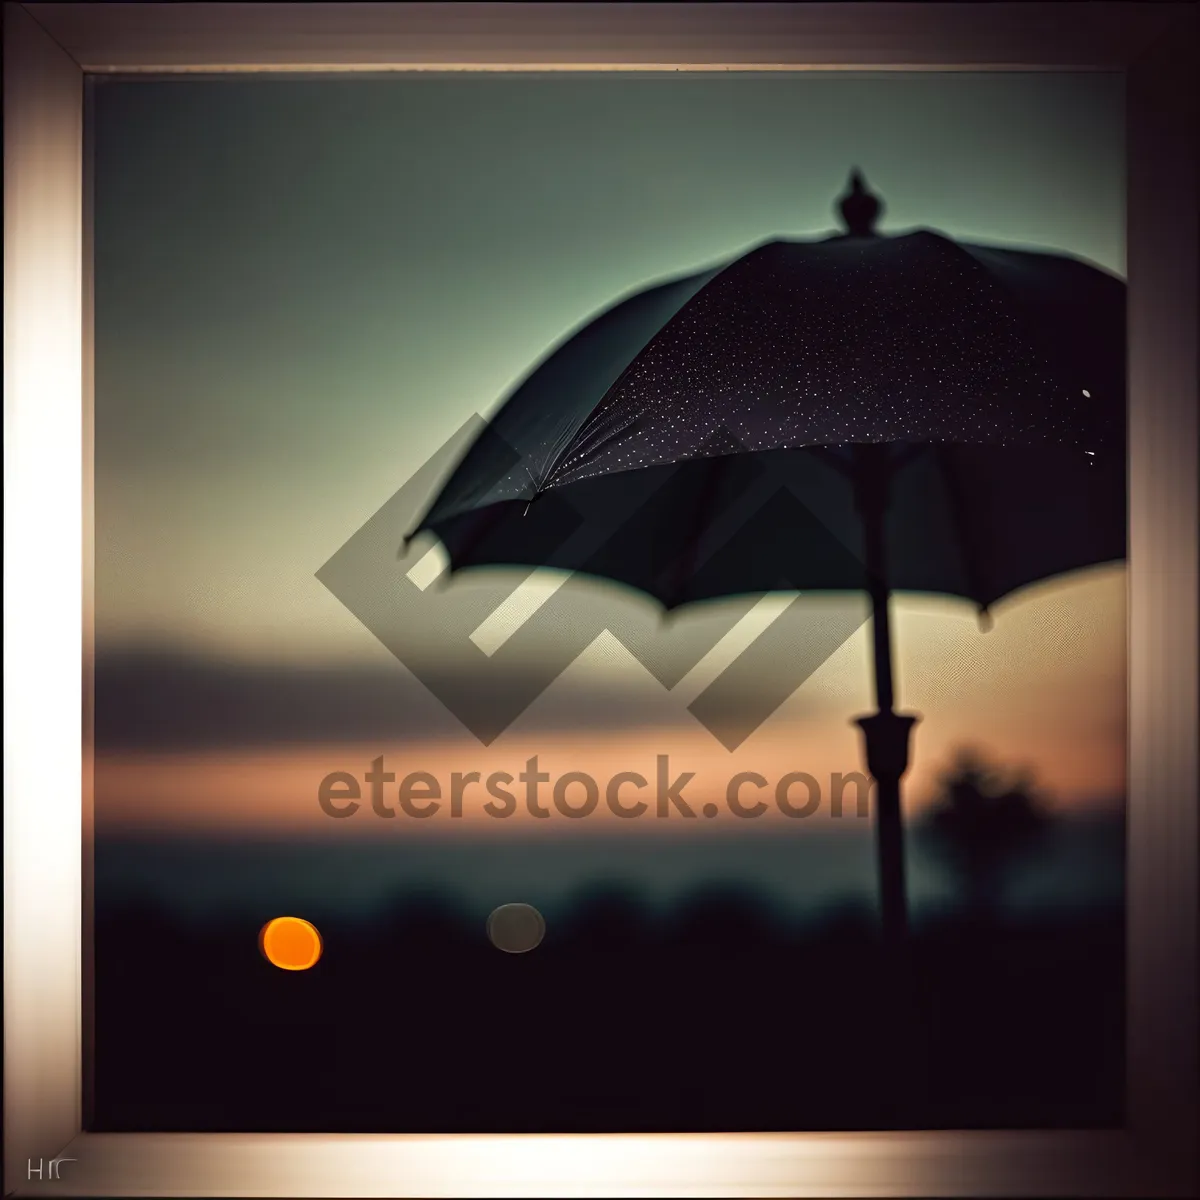 Picture of Rainy Day Shelter: Umbrella Lampshade Provides Protection and Style